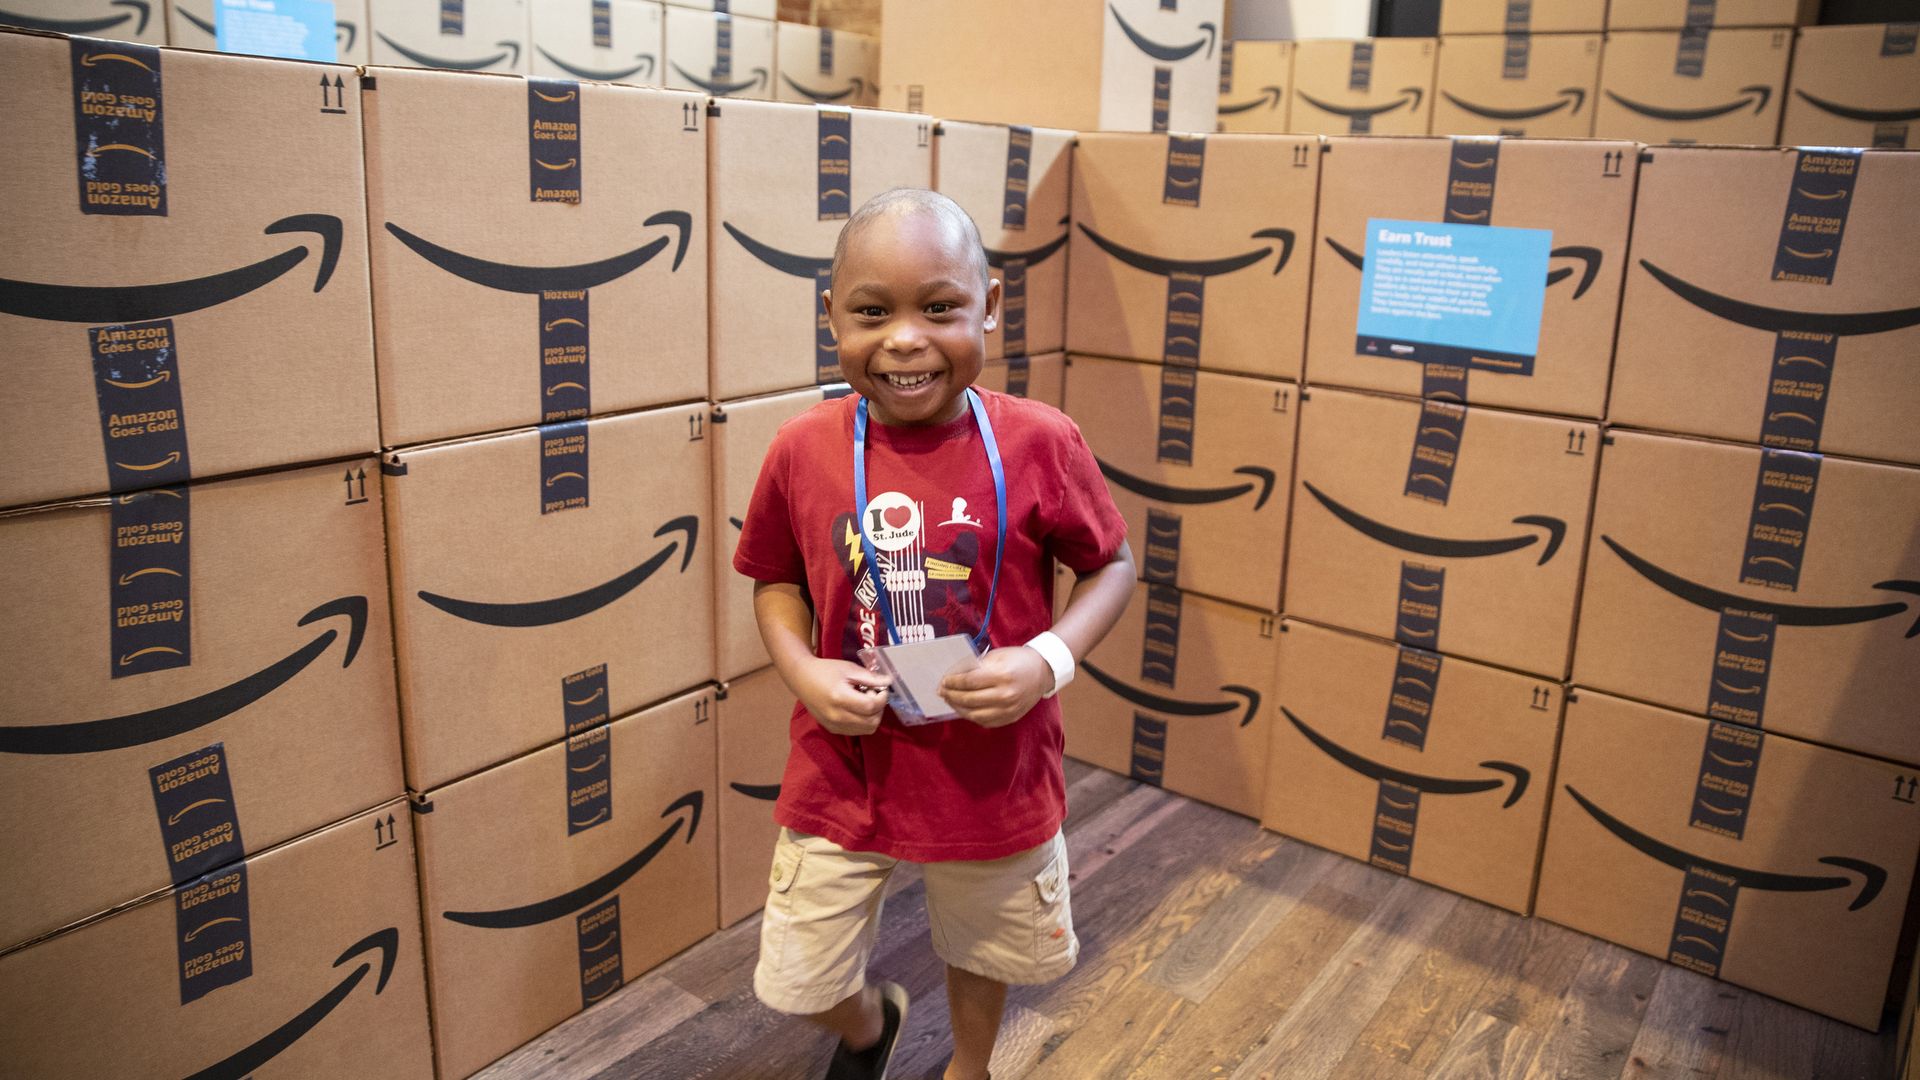 A boy in a red shirt stands in front a pile of Amazon boxes